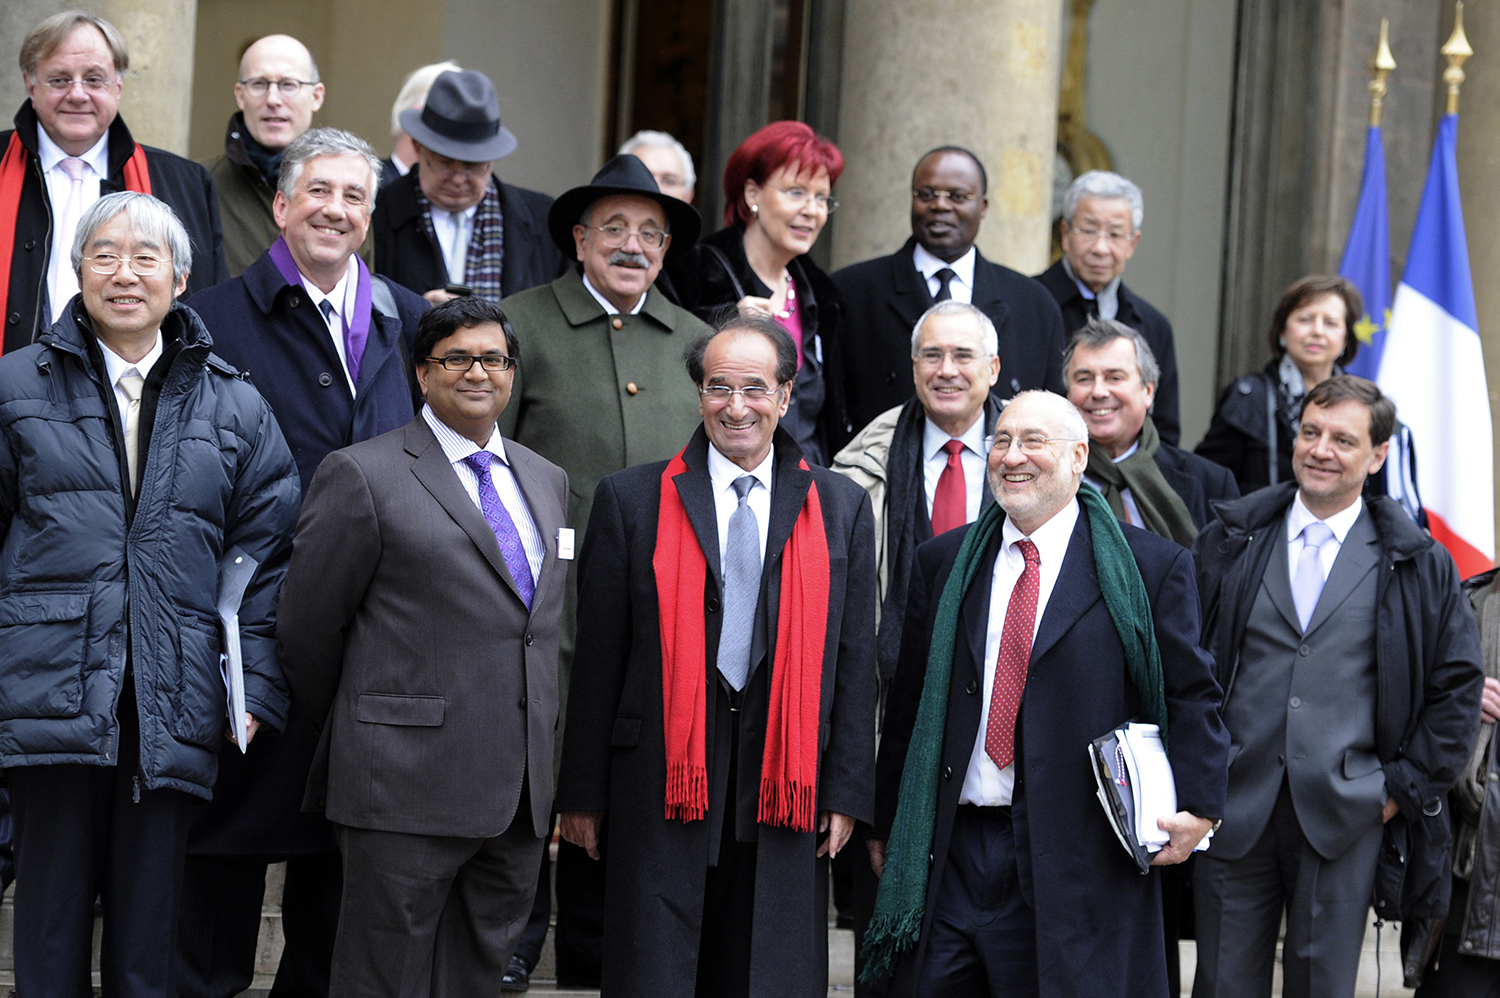 International economists including Persaud pose in front of the Elysee Palace in Paris on Jan. 6, 2011, after a working lunch with French President Nicolas Sarkozy to prepare for the G-20 meeting.